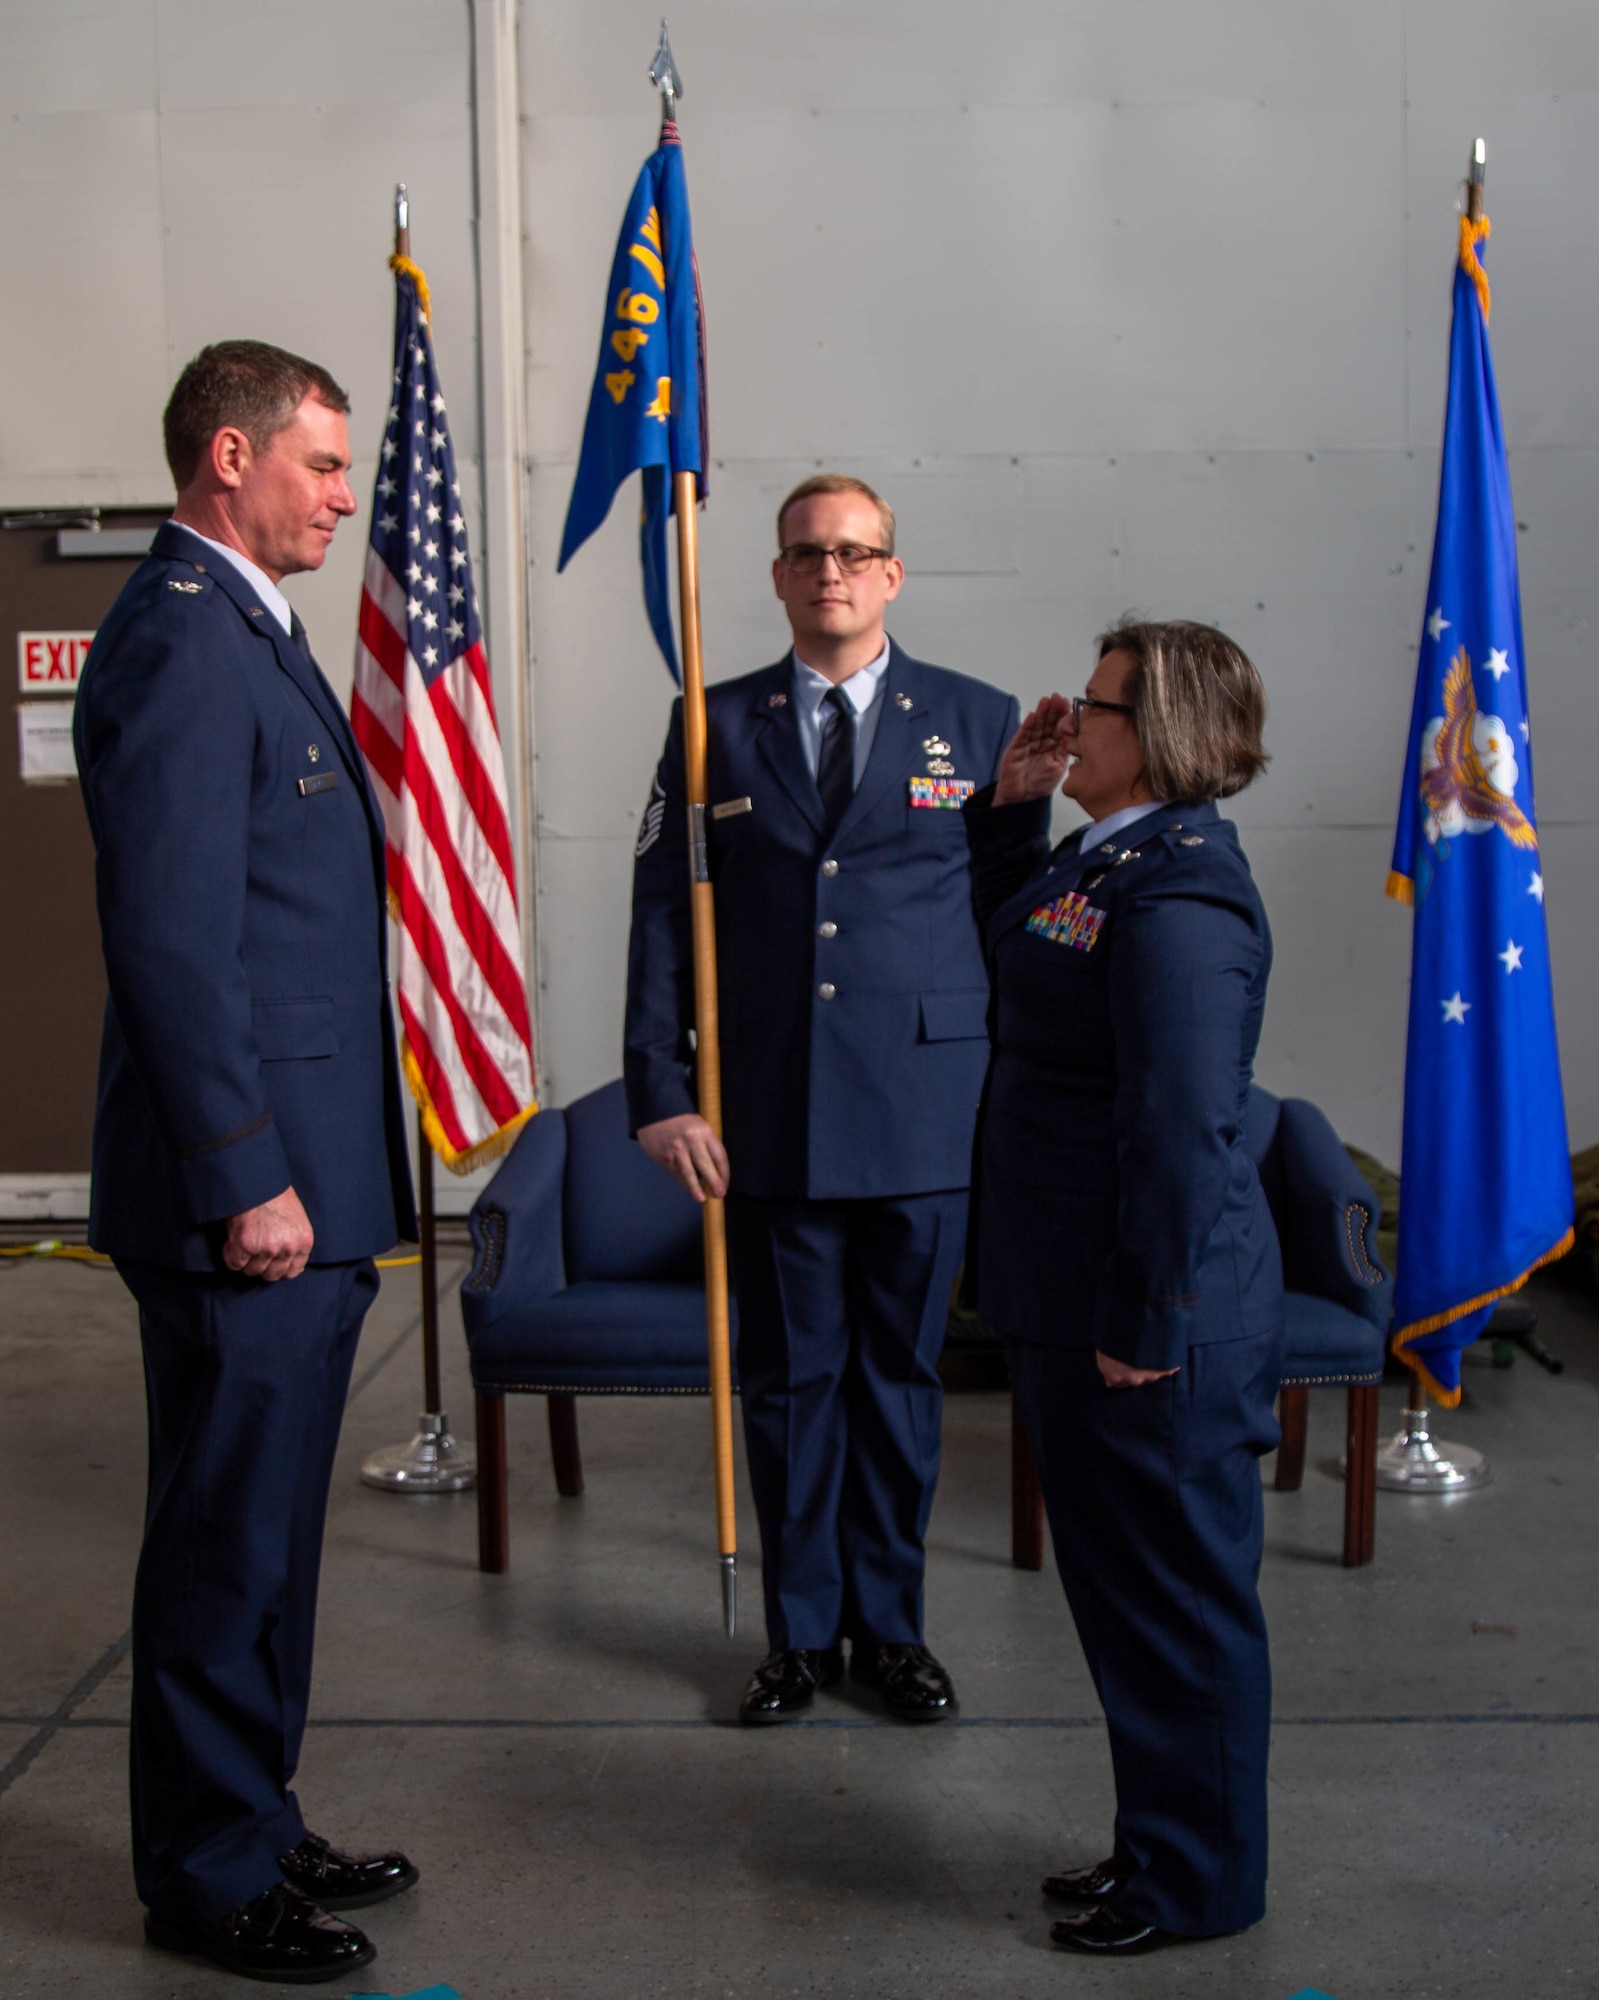 Lt Colonel Anniesa Selimos salutes Colonel Scott Meyer in front of the blue 446 Airlift Wing guidon flag.